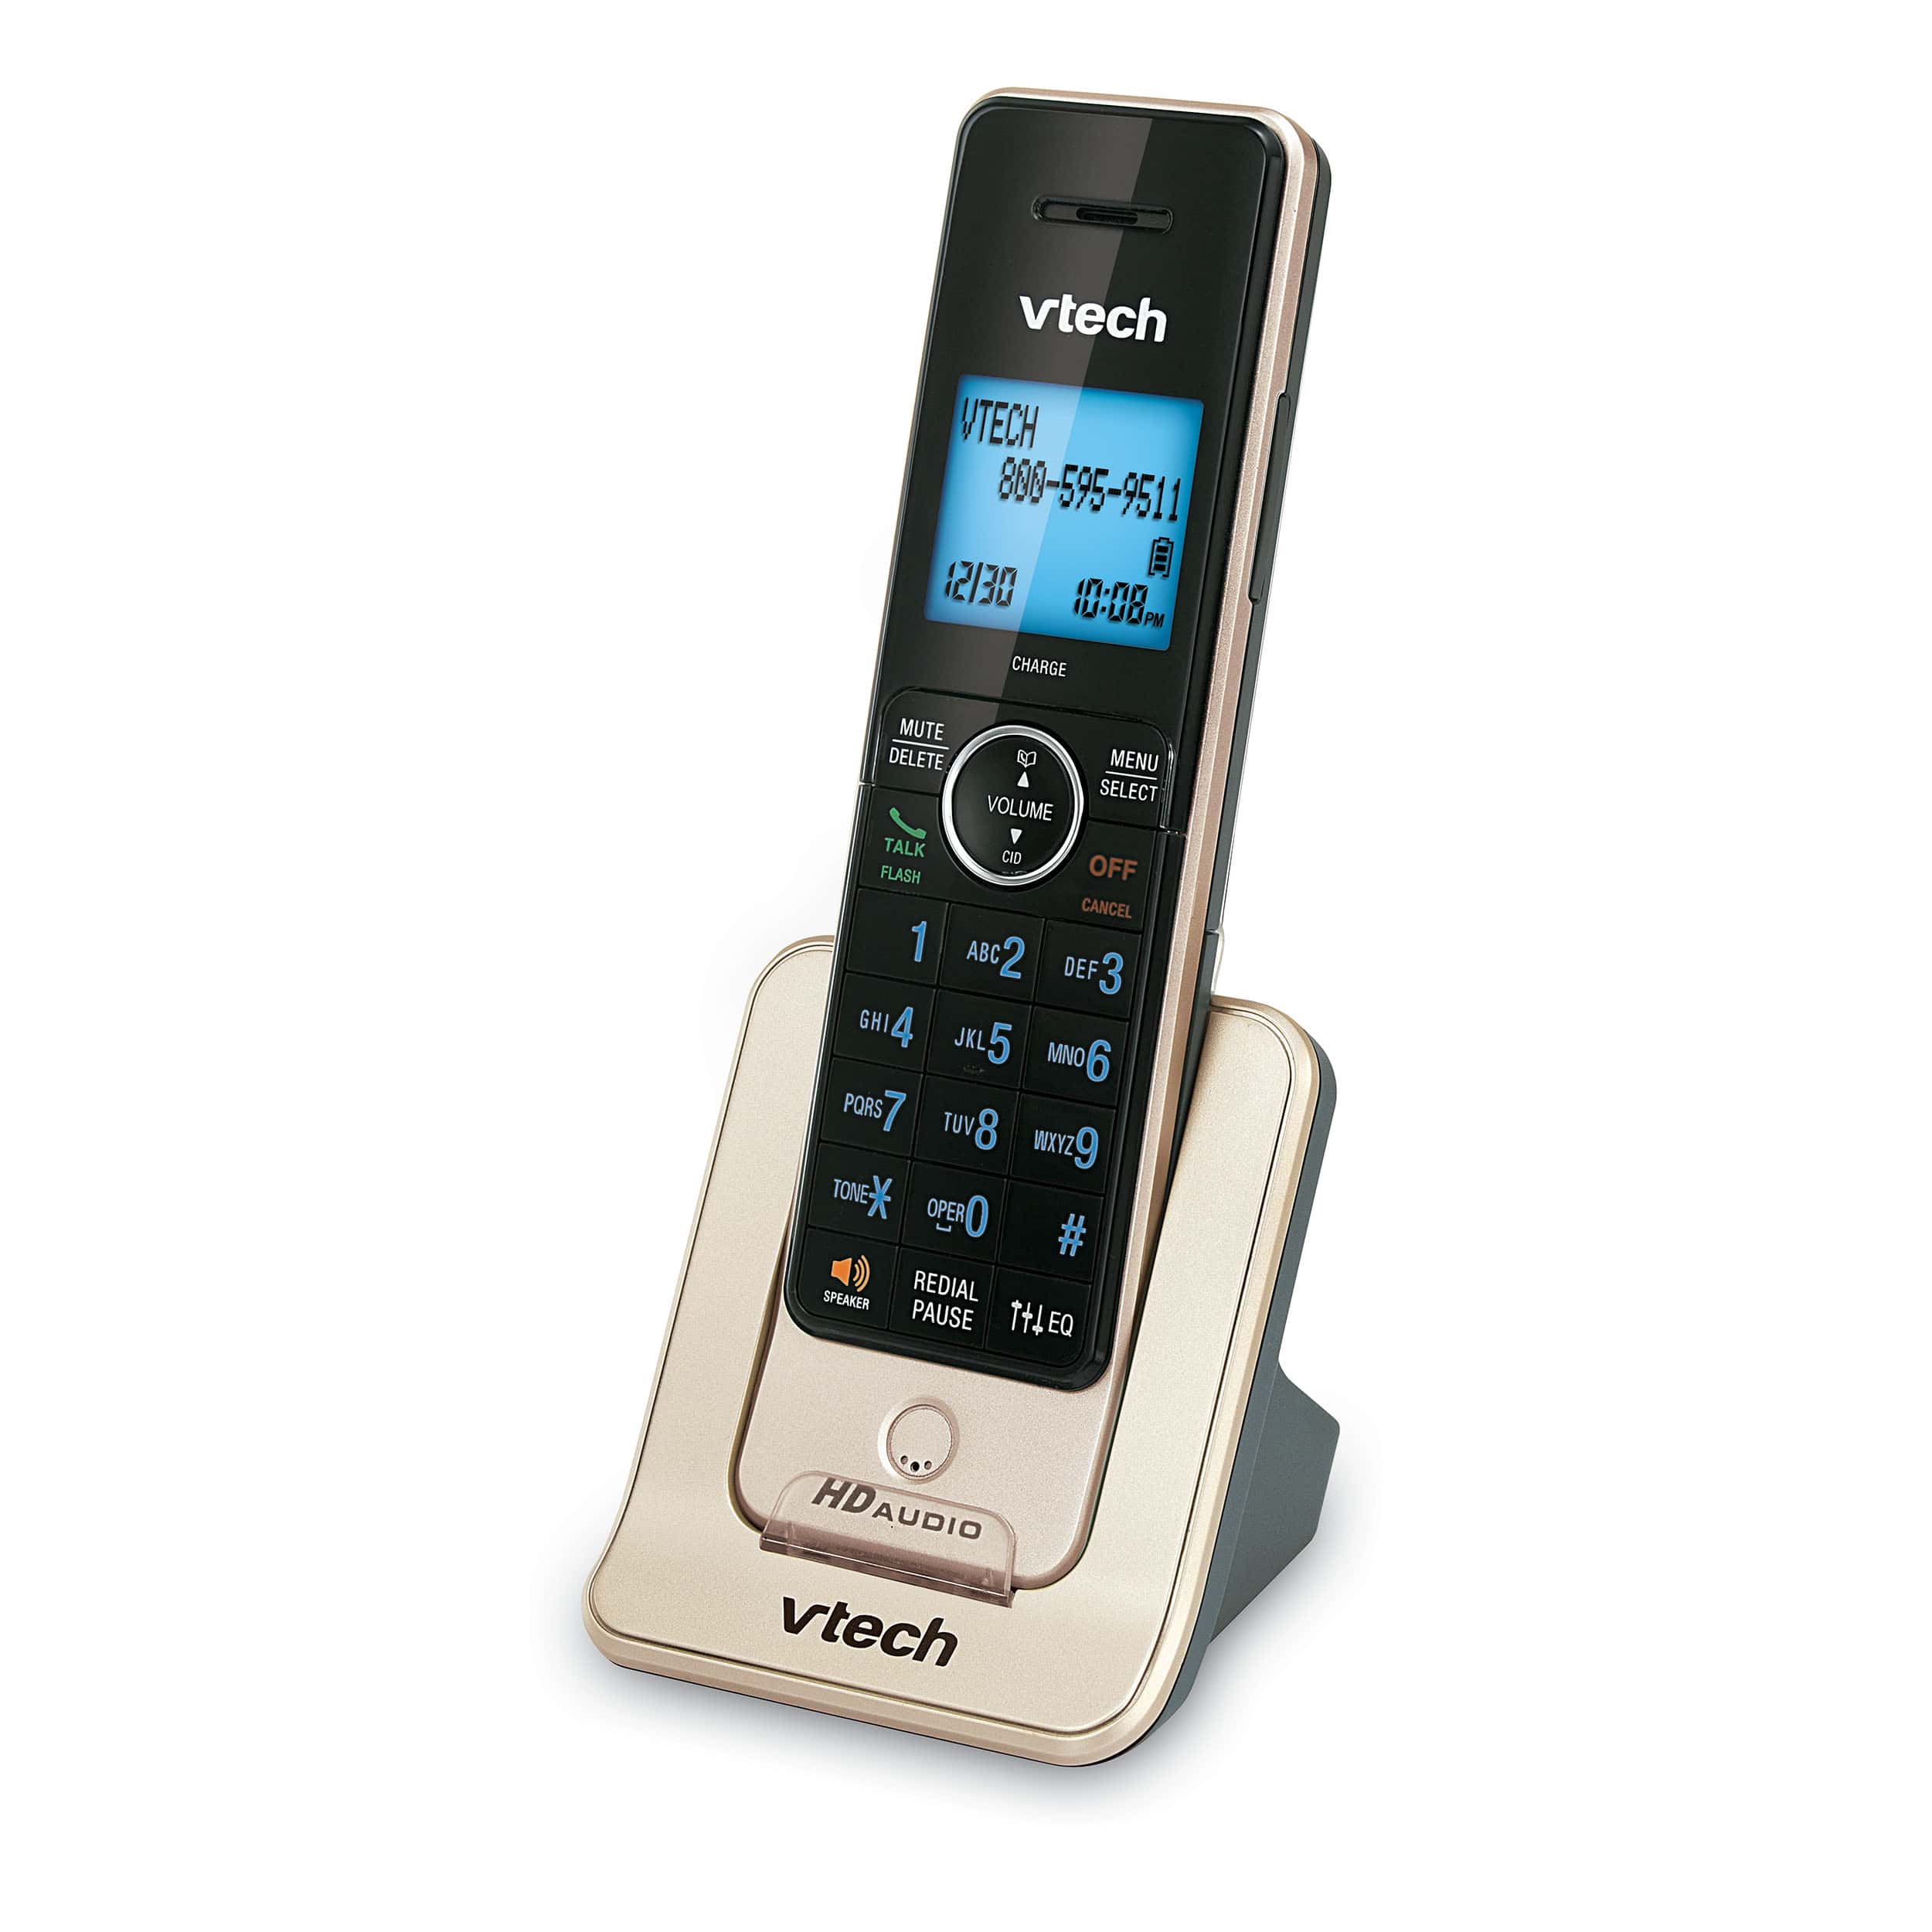 5 Handset Phone System with Caller ID/Call Waiting